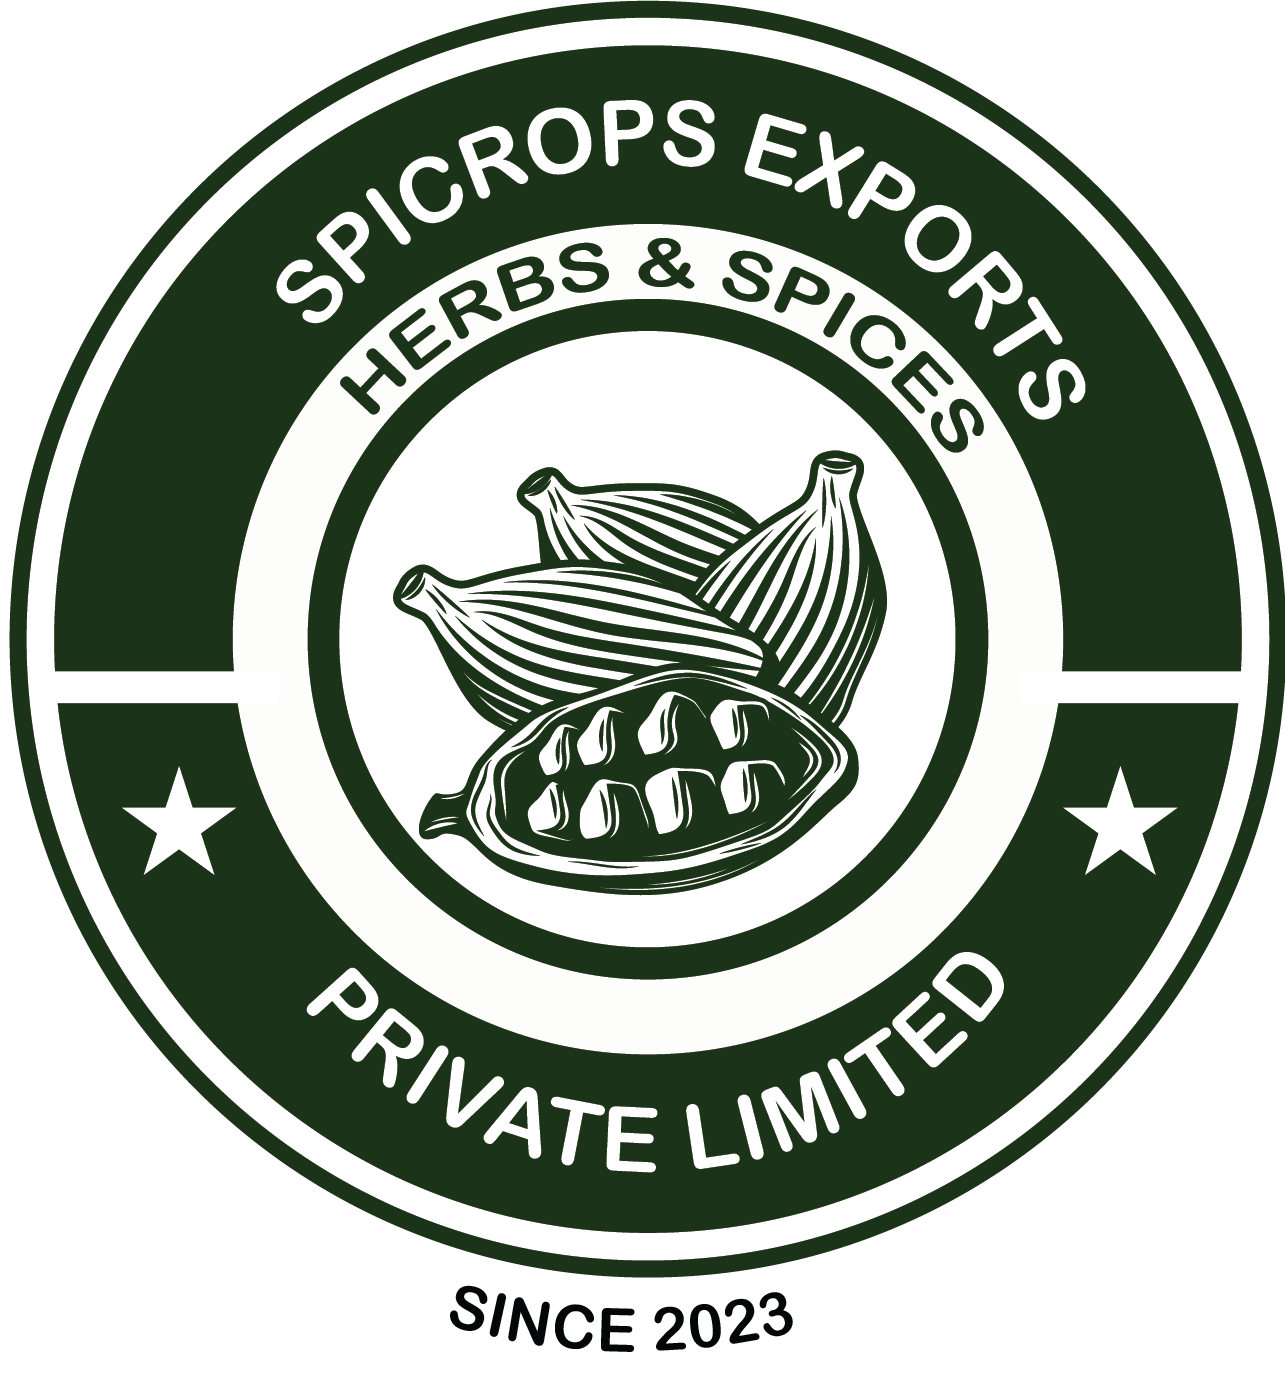 SpicesCrops